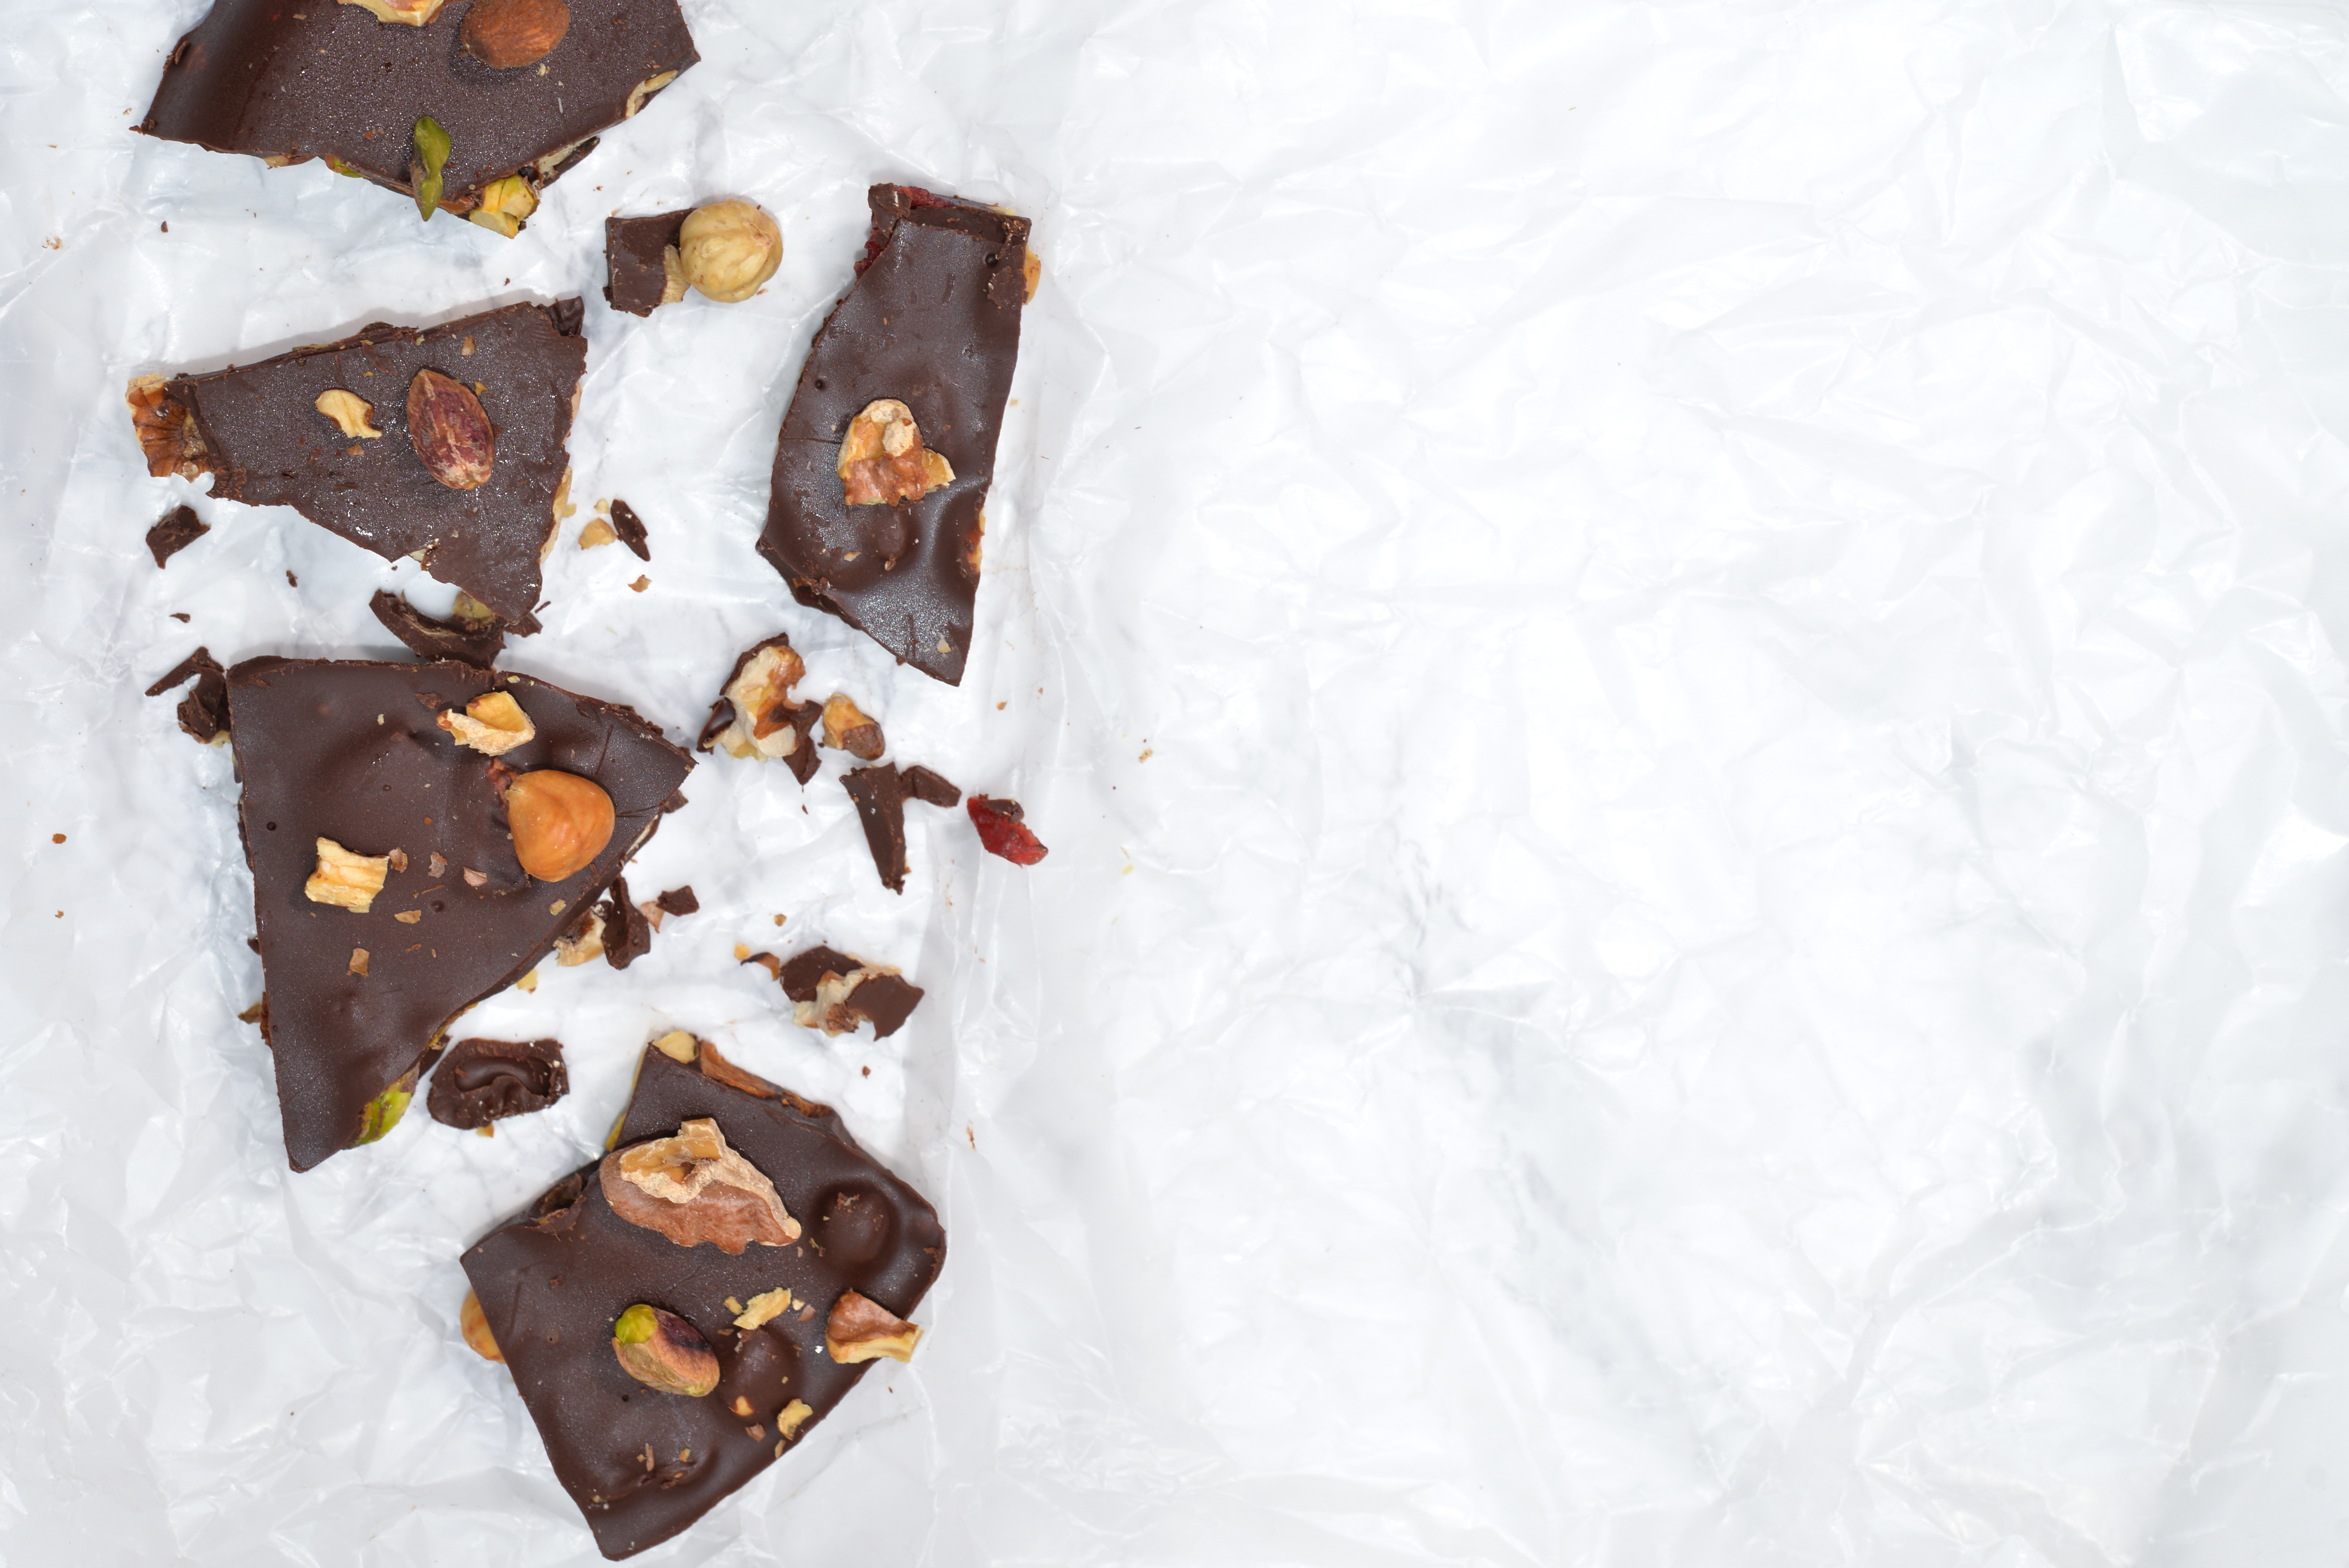 Dark chocolate bark with mixed nuts on wax paper